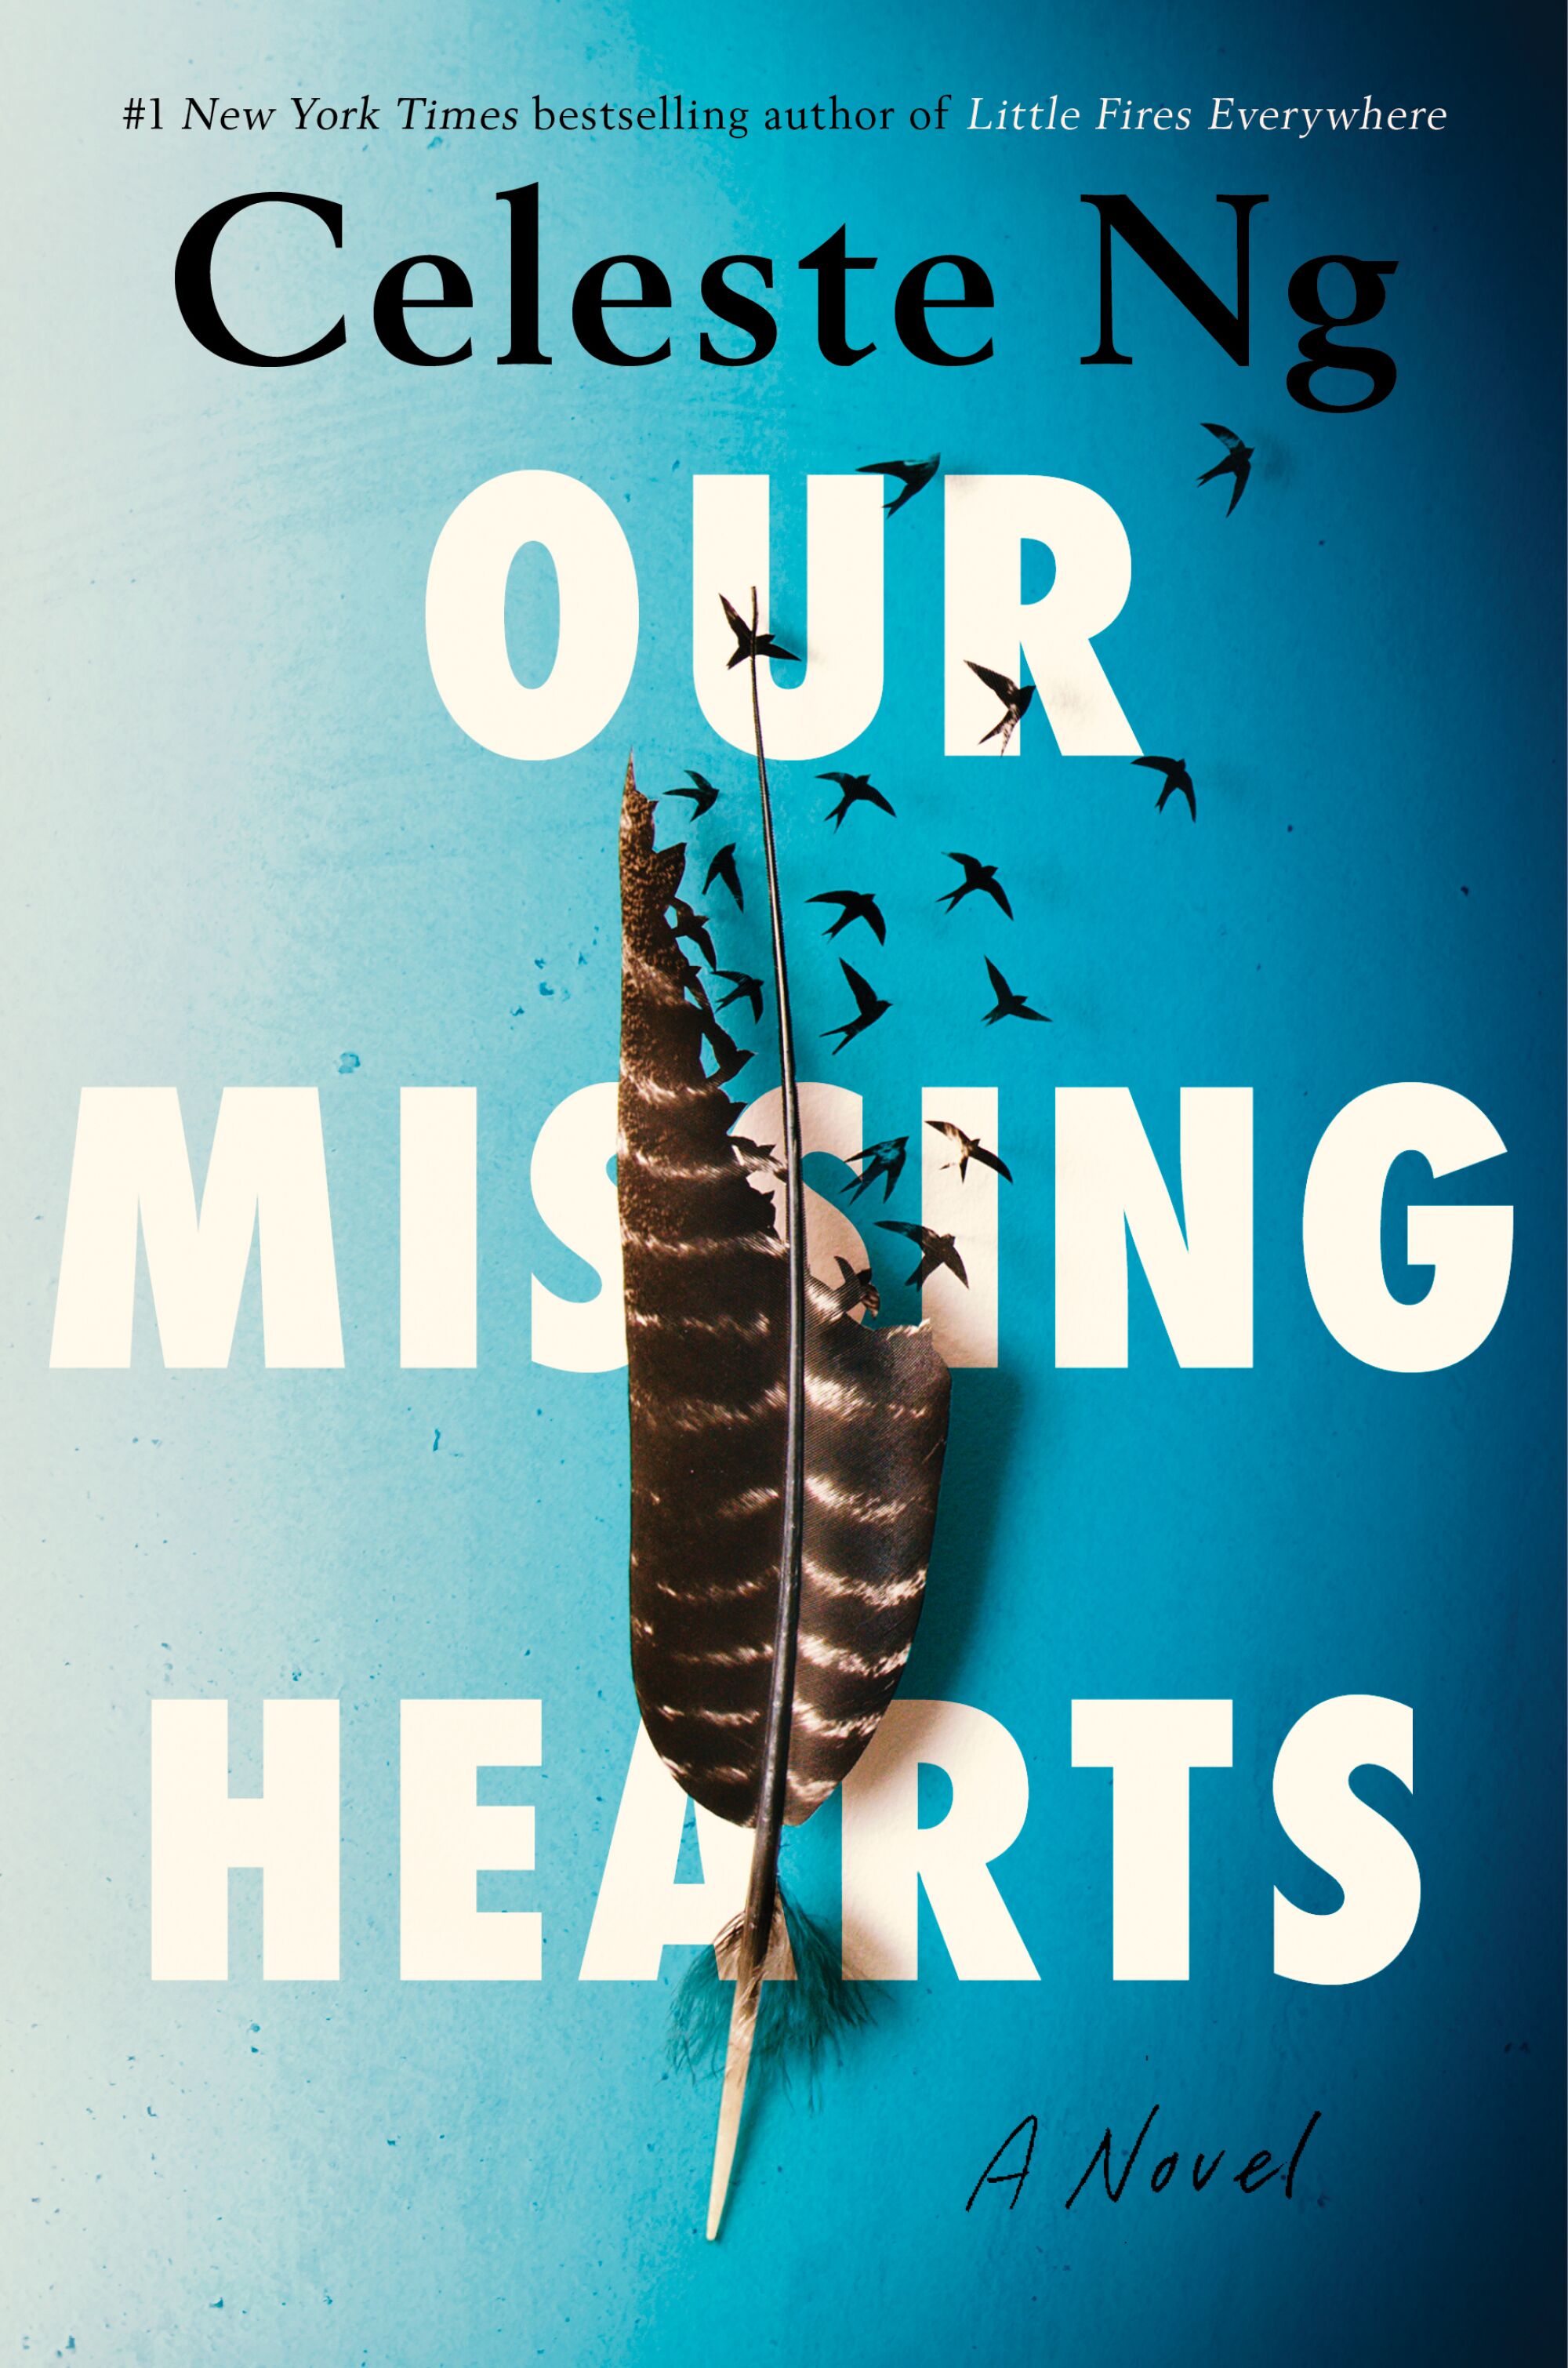 Feather on the words on the cover of "Our missing hearts" by Celeste Ng